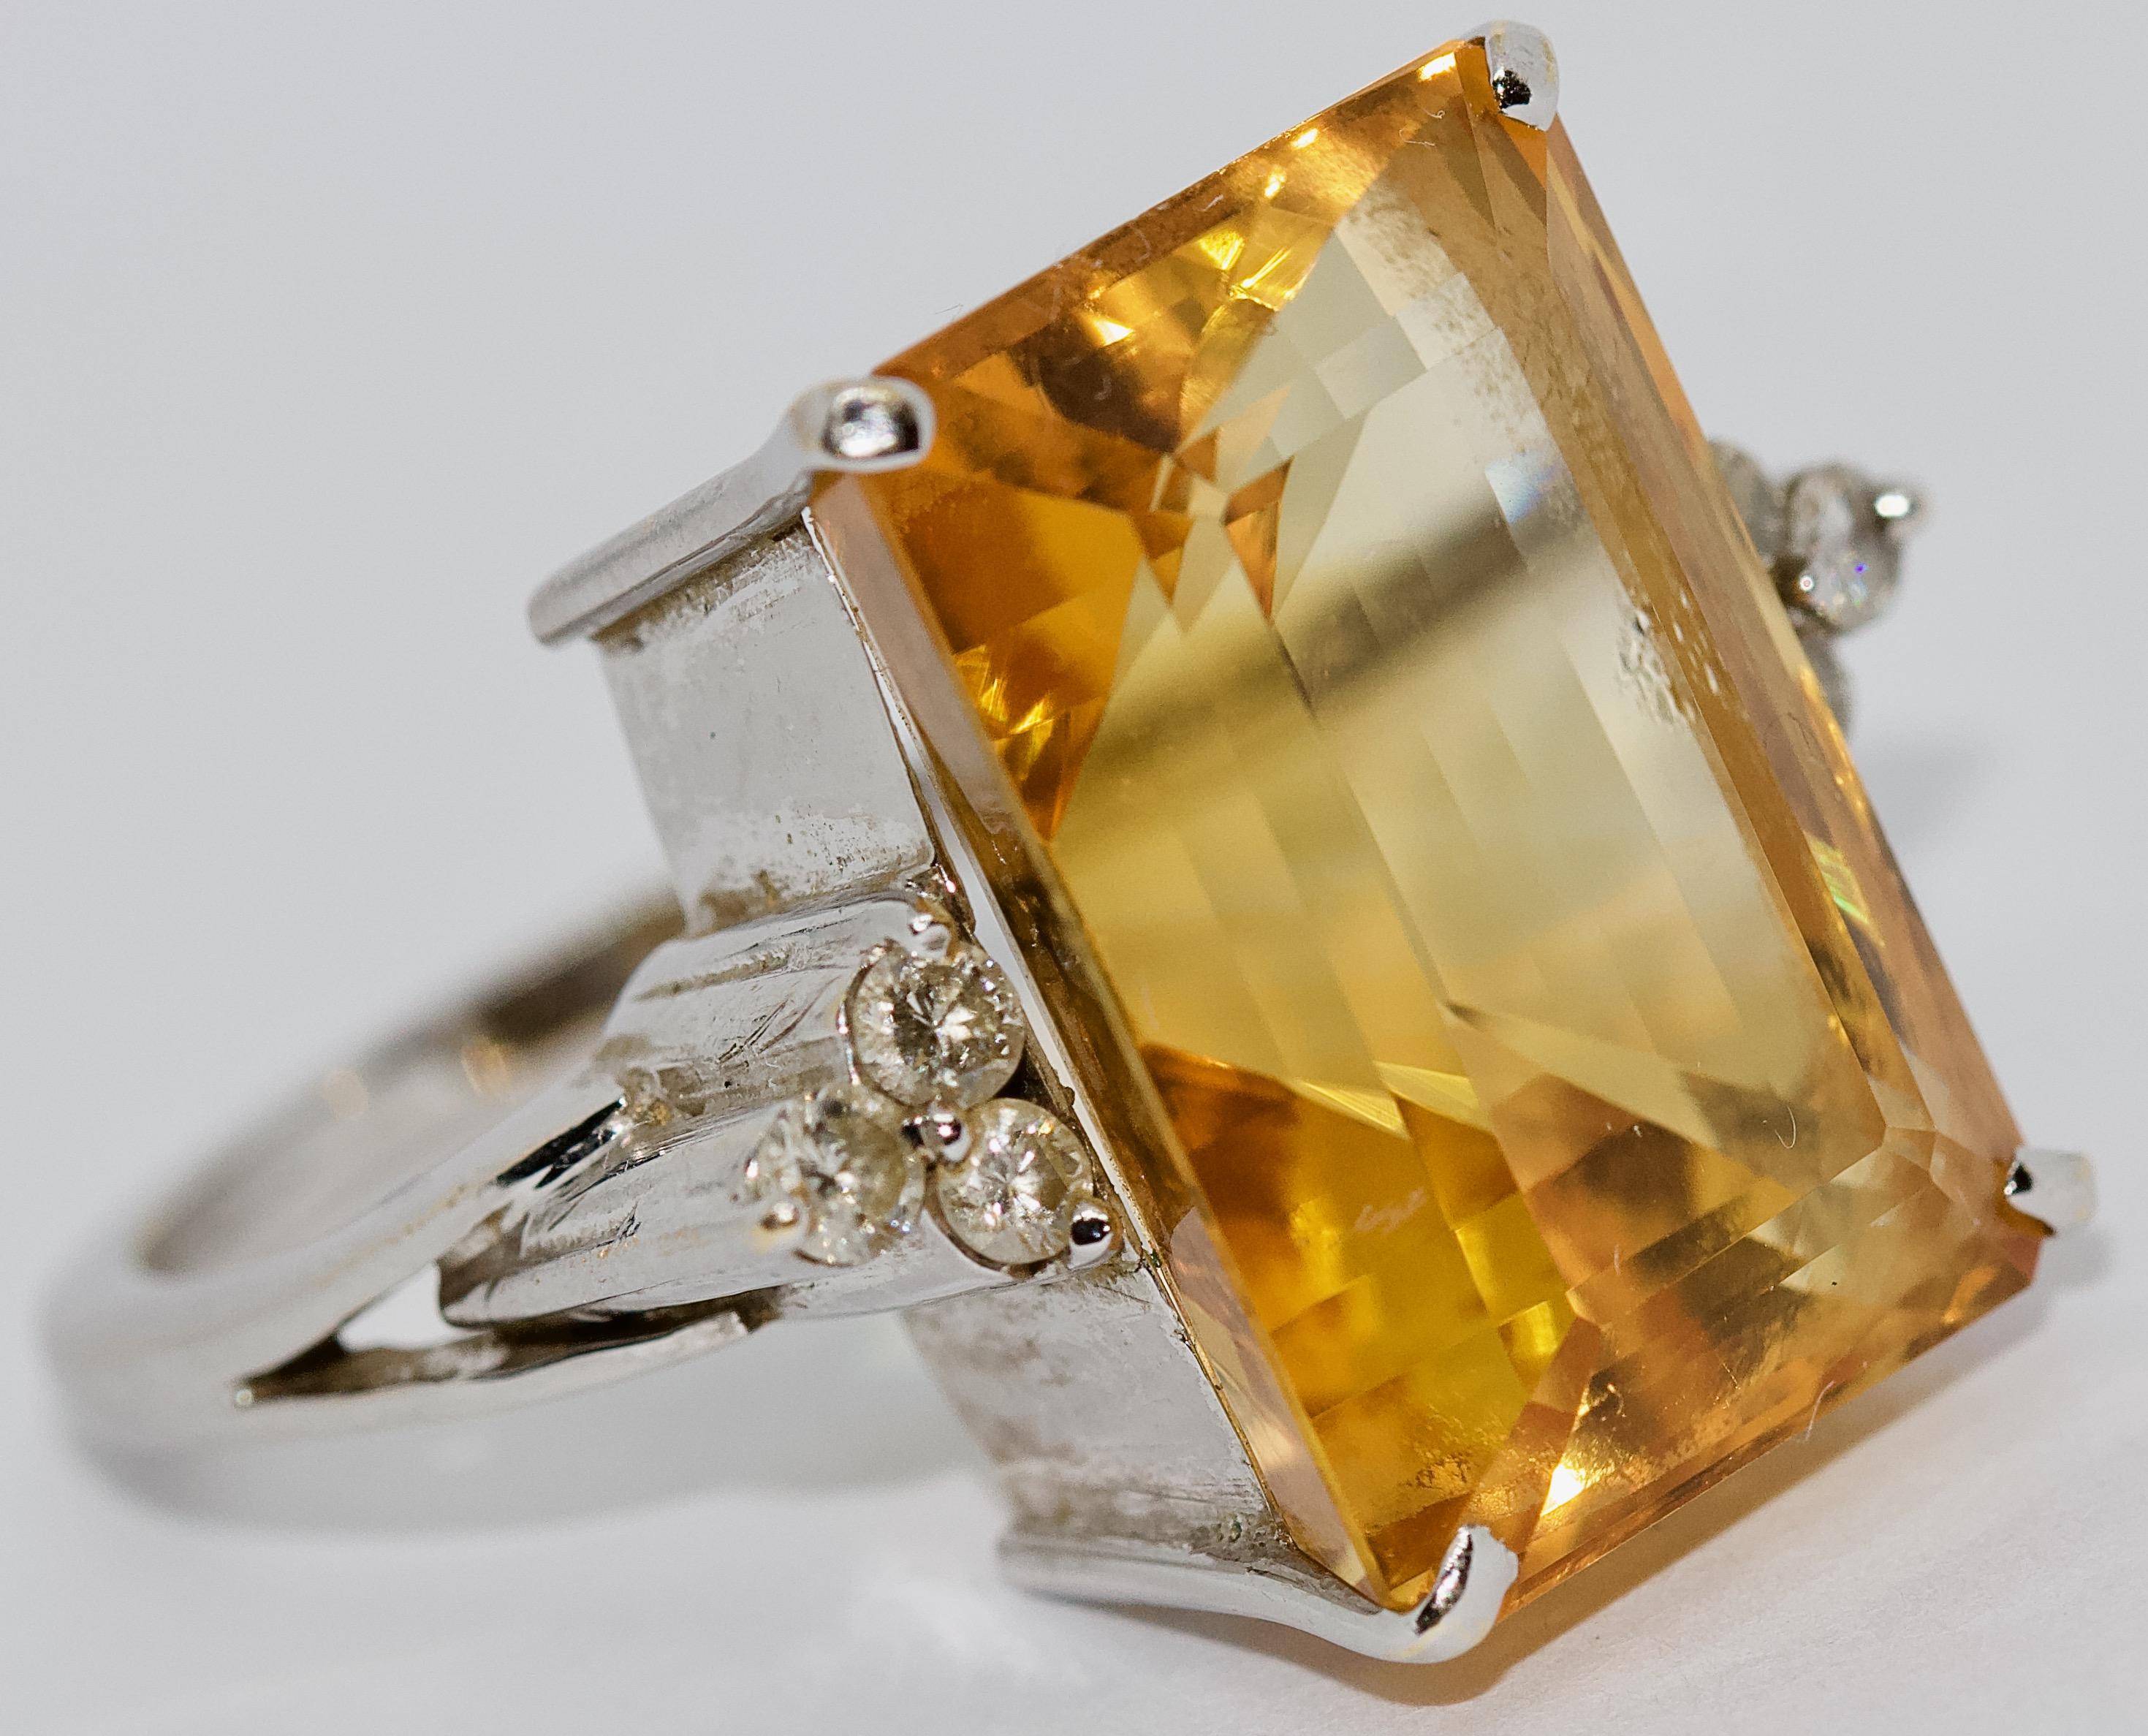 Flashy ladies' luxury ring, 18 K white gold with large faceted citrine in emerald cut and diamonds.

Including certificate of authenticity.

US ring size 9
On request we can adjust the ring size expertly.